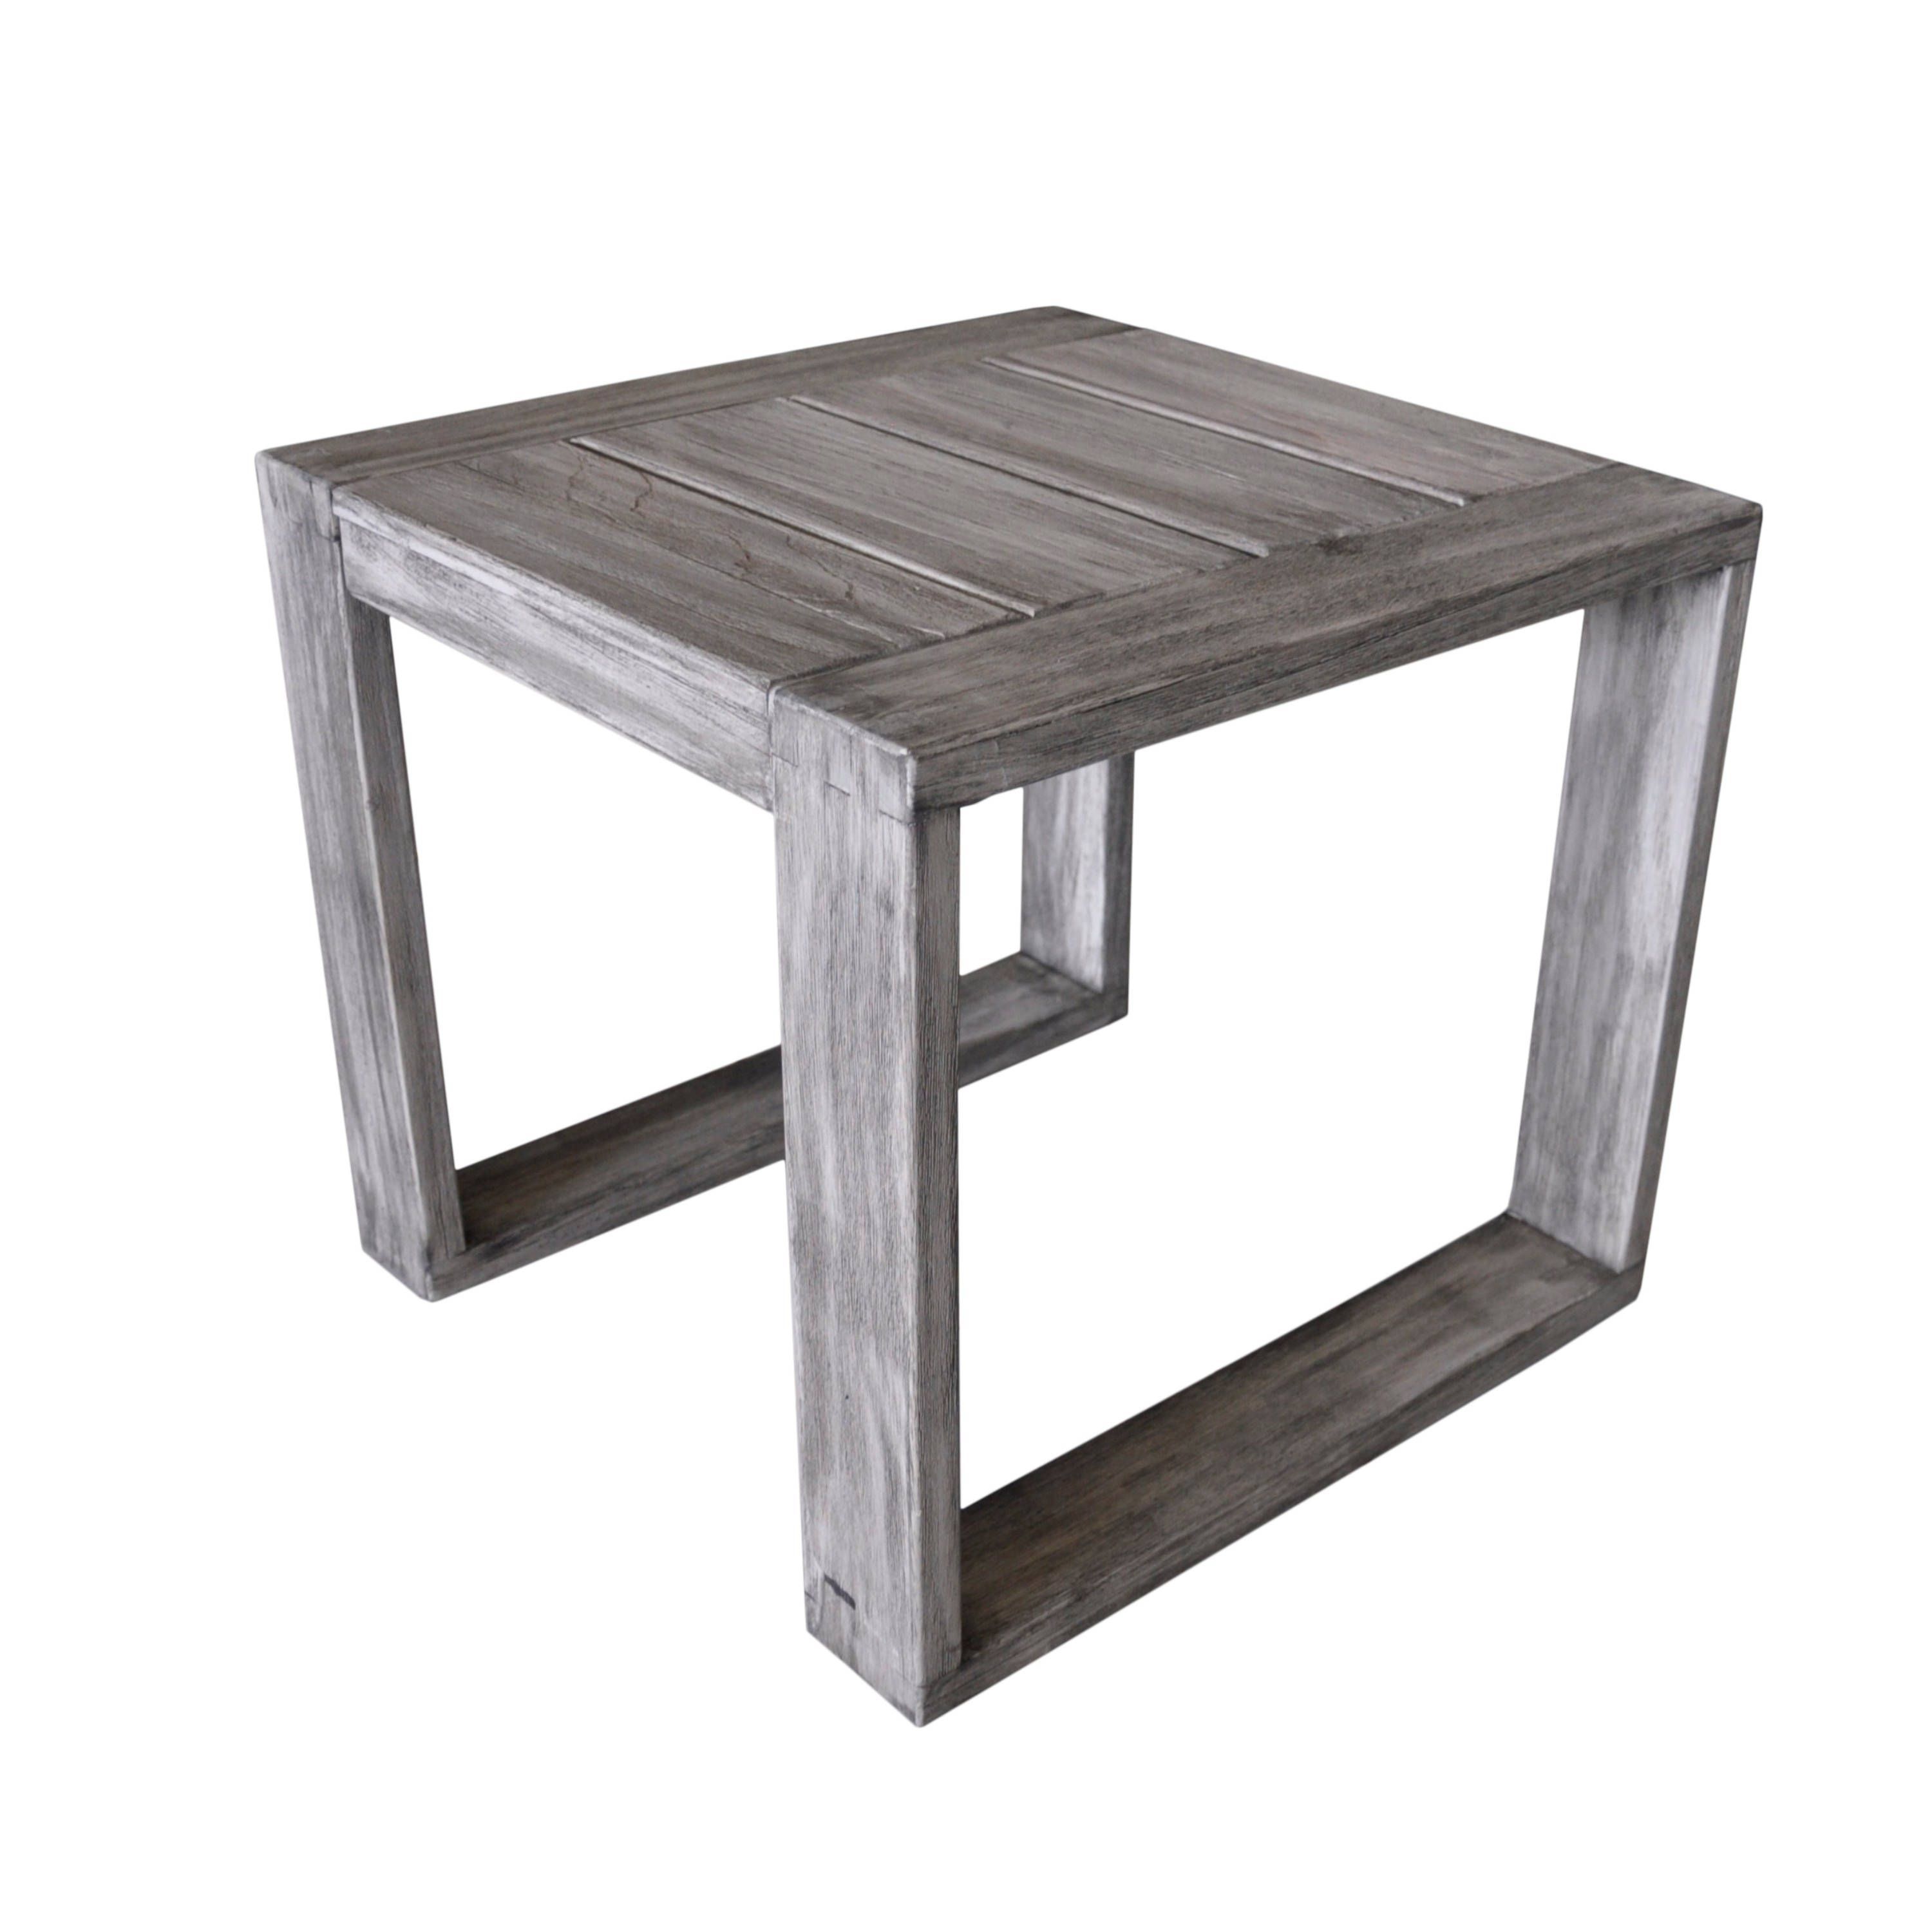 courtyard casual driftwood north shore outdoor side table patio modern furniture hallway console cabinet quilting sliding barn closet doors rustic pedestal dining cordless lamps